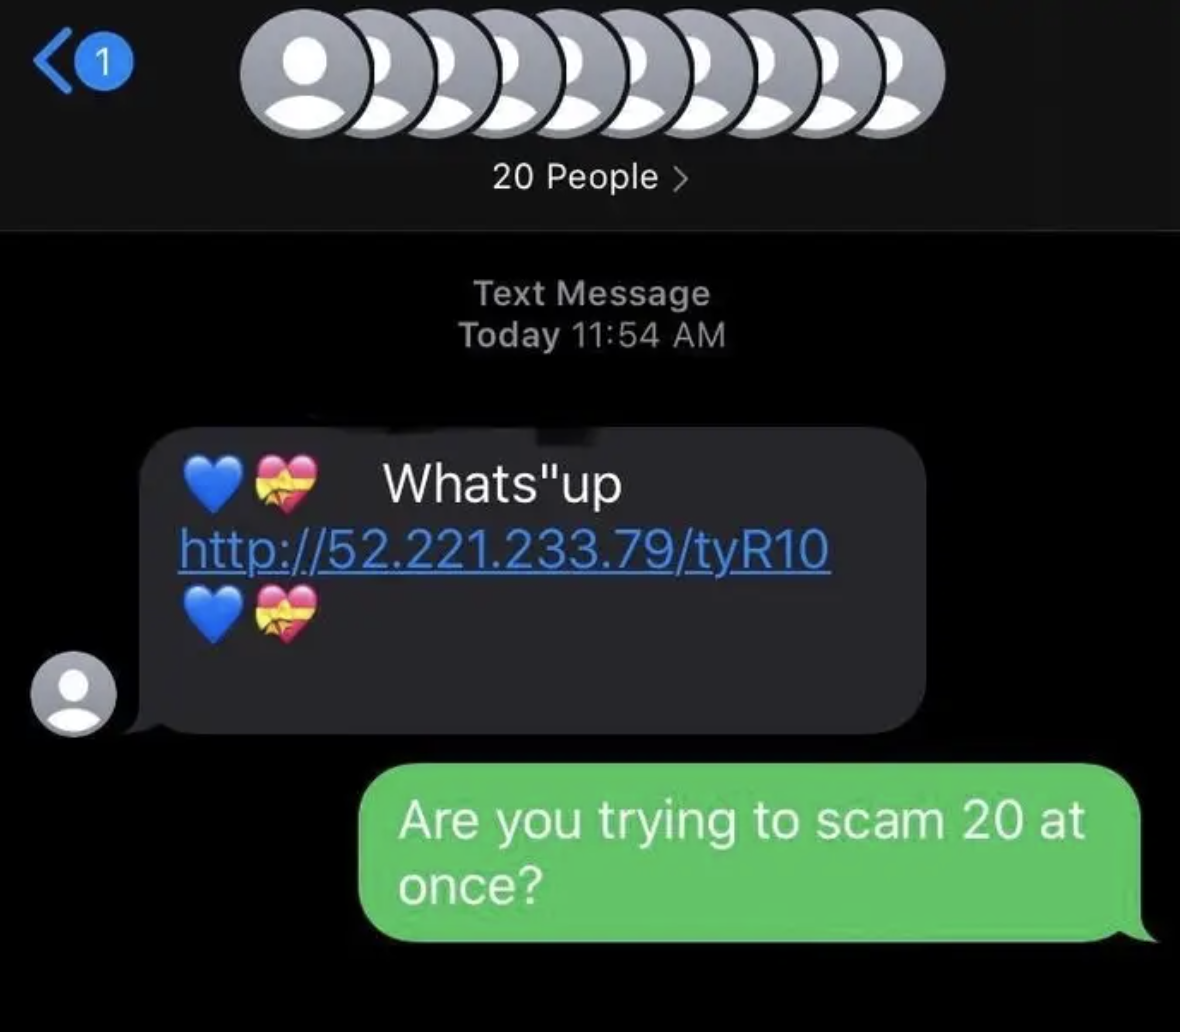 Text of someone texting 20 people at once to scam them